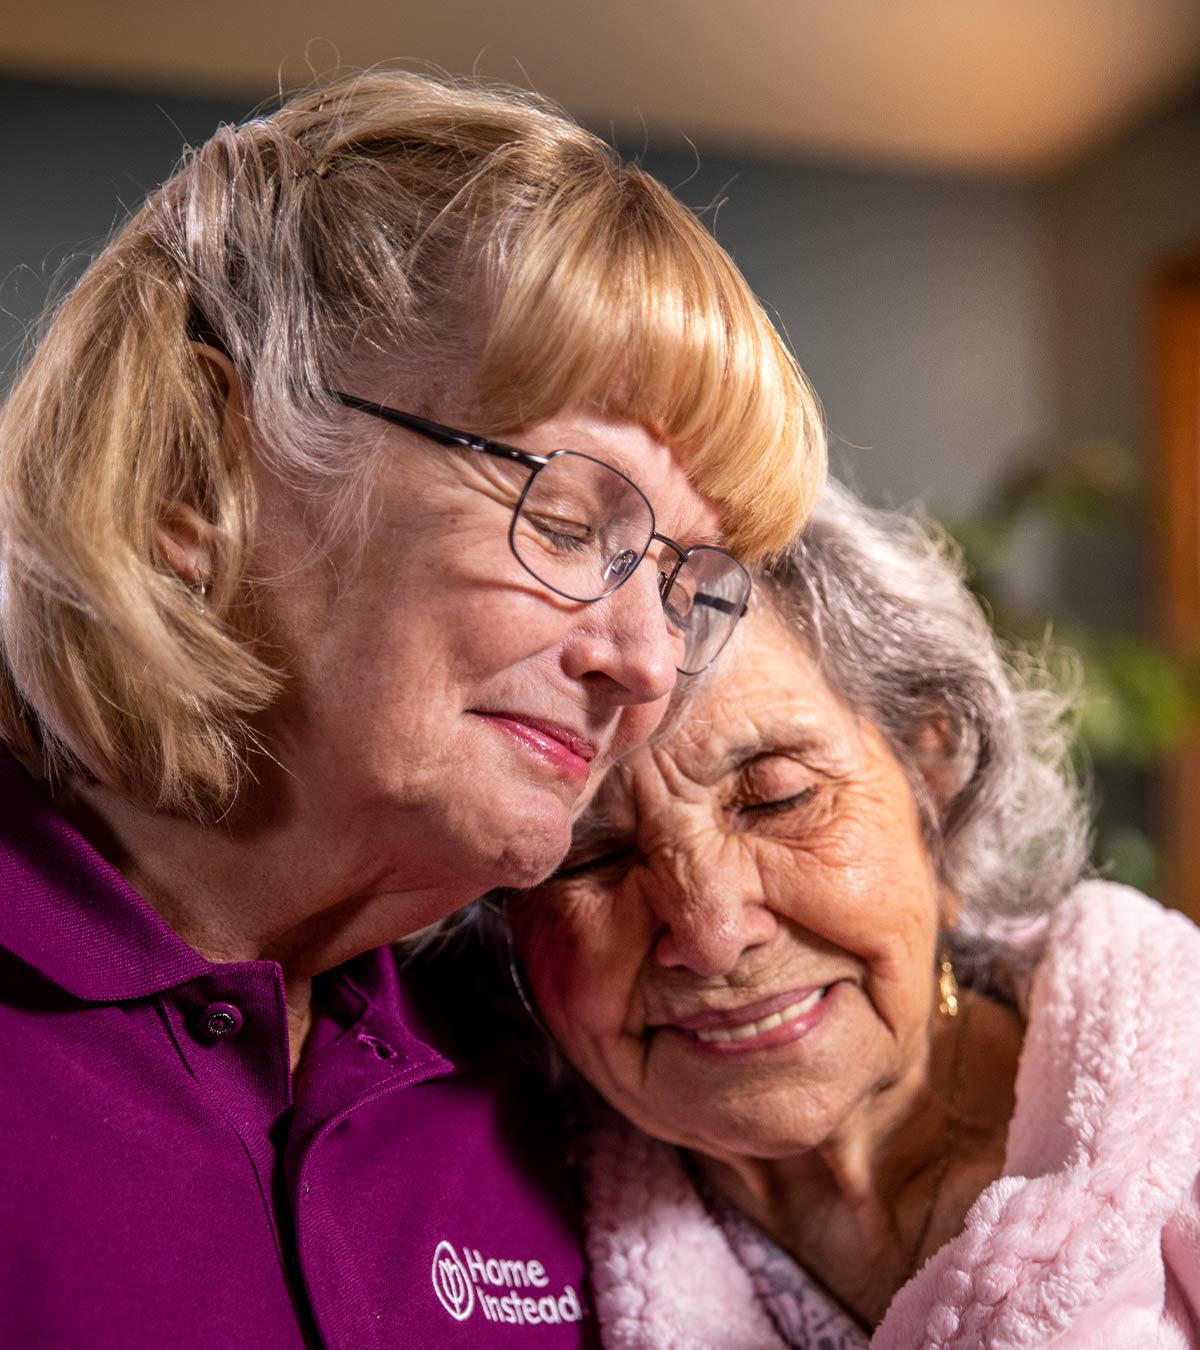 CAREGiver providing in-home senior care services. Home Instead of Statesville, NC provides Elder Care to aging adults. 